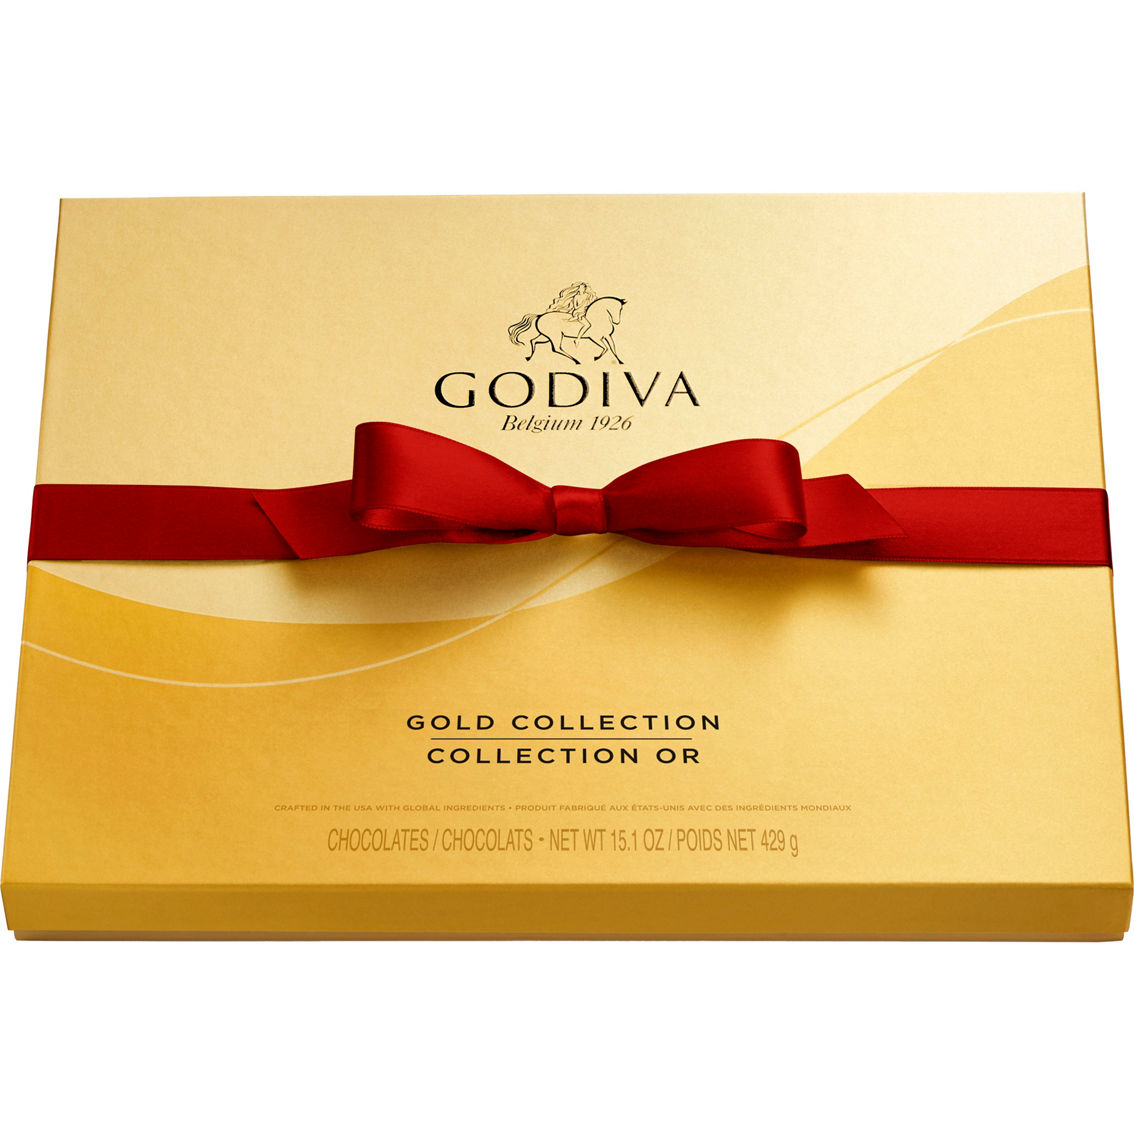 Godiva Assorted Chocolate Gold Gift Box with Red Ribbon 36 pc. - Image 2 of 2